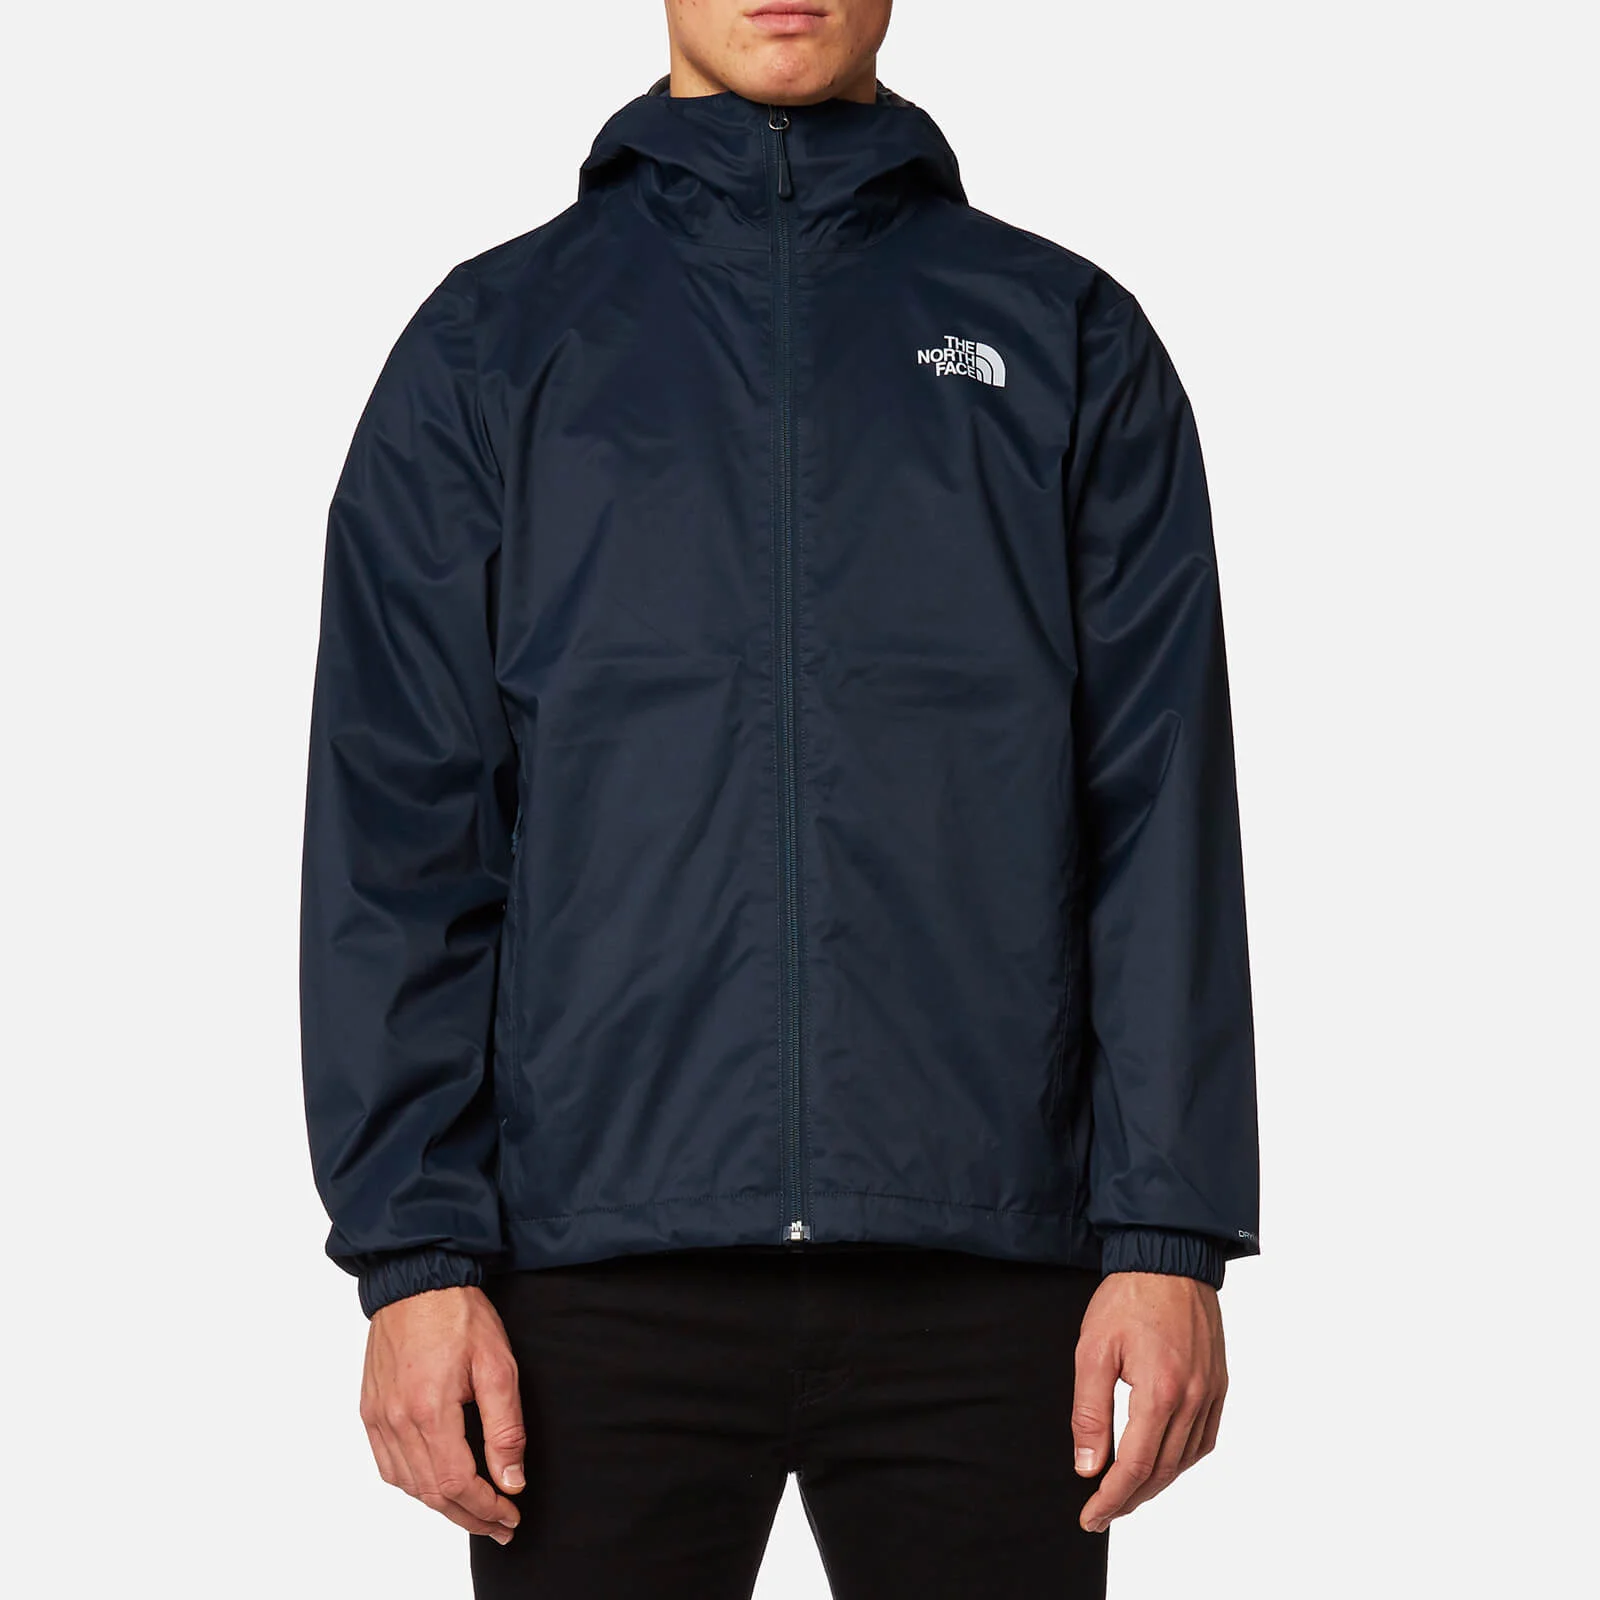 The North Face Men's Quest Jacket - Urban Navy Image 1